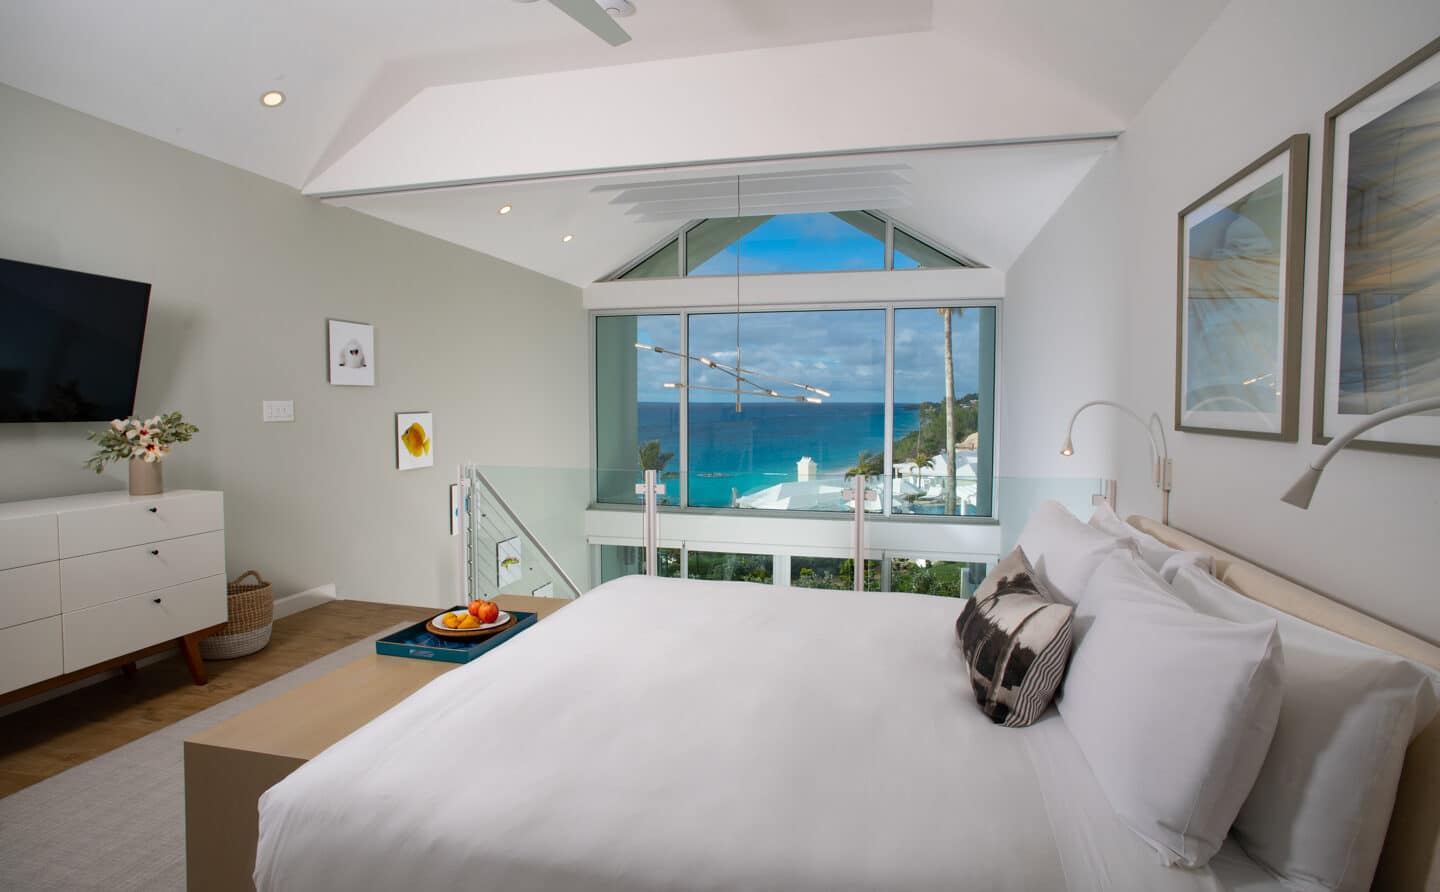 A loft bedroom with a TV and a large window with an ocean view.